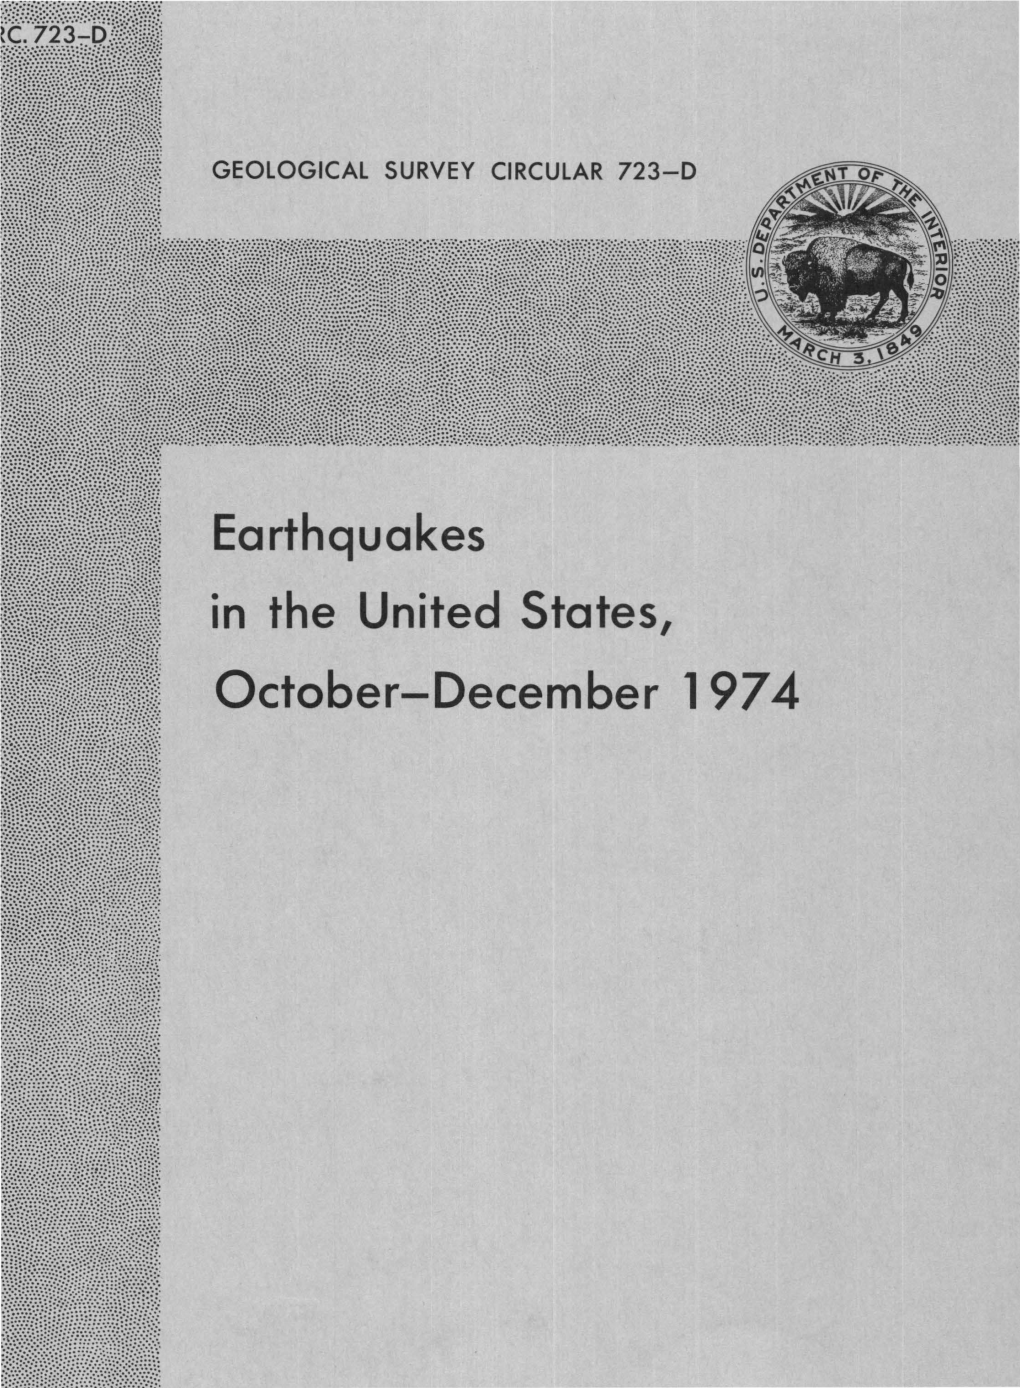 Earthquakes in the United States, October-December 197 4